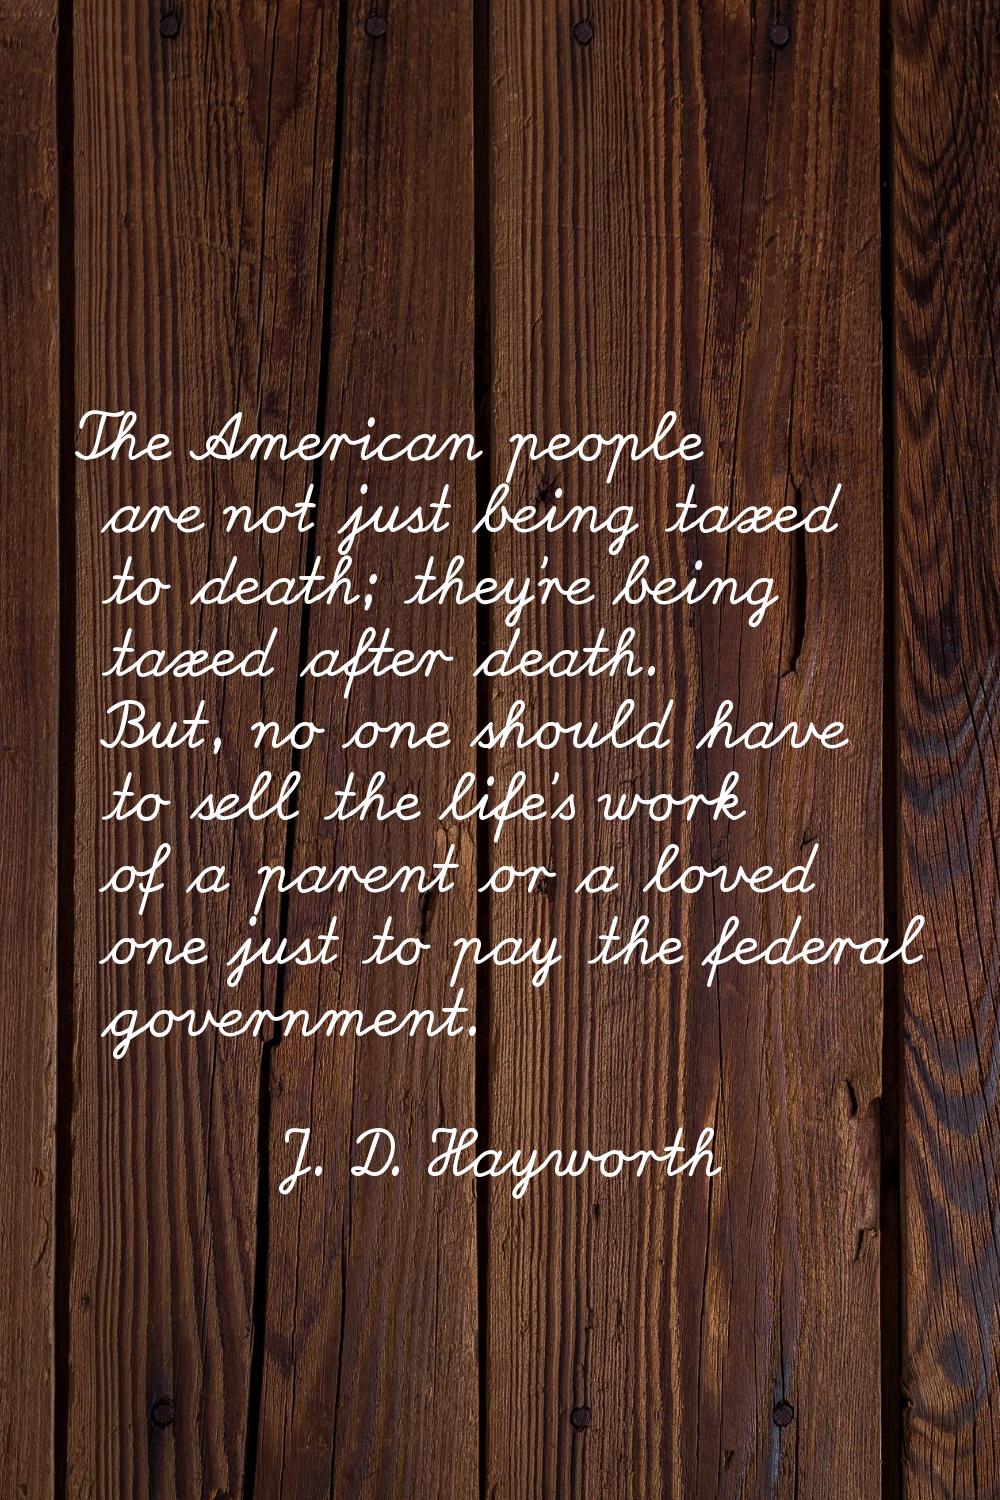 The American people are not just being taxed to death; they're being taxed after death. But, no one